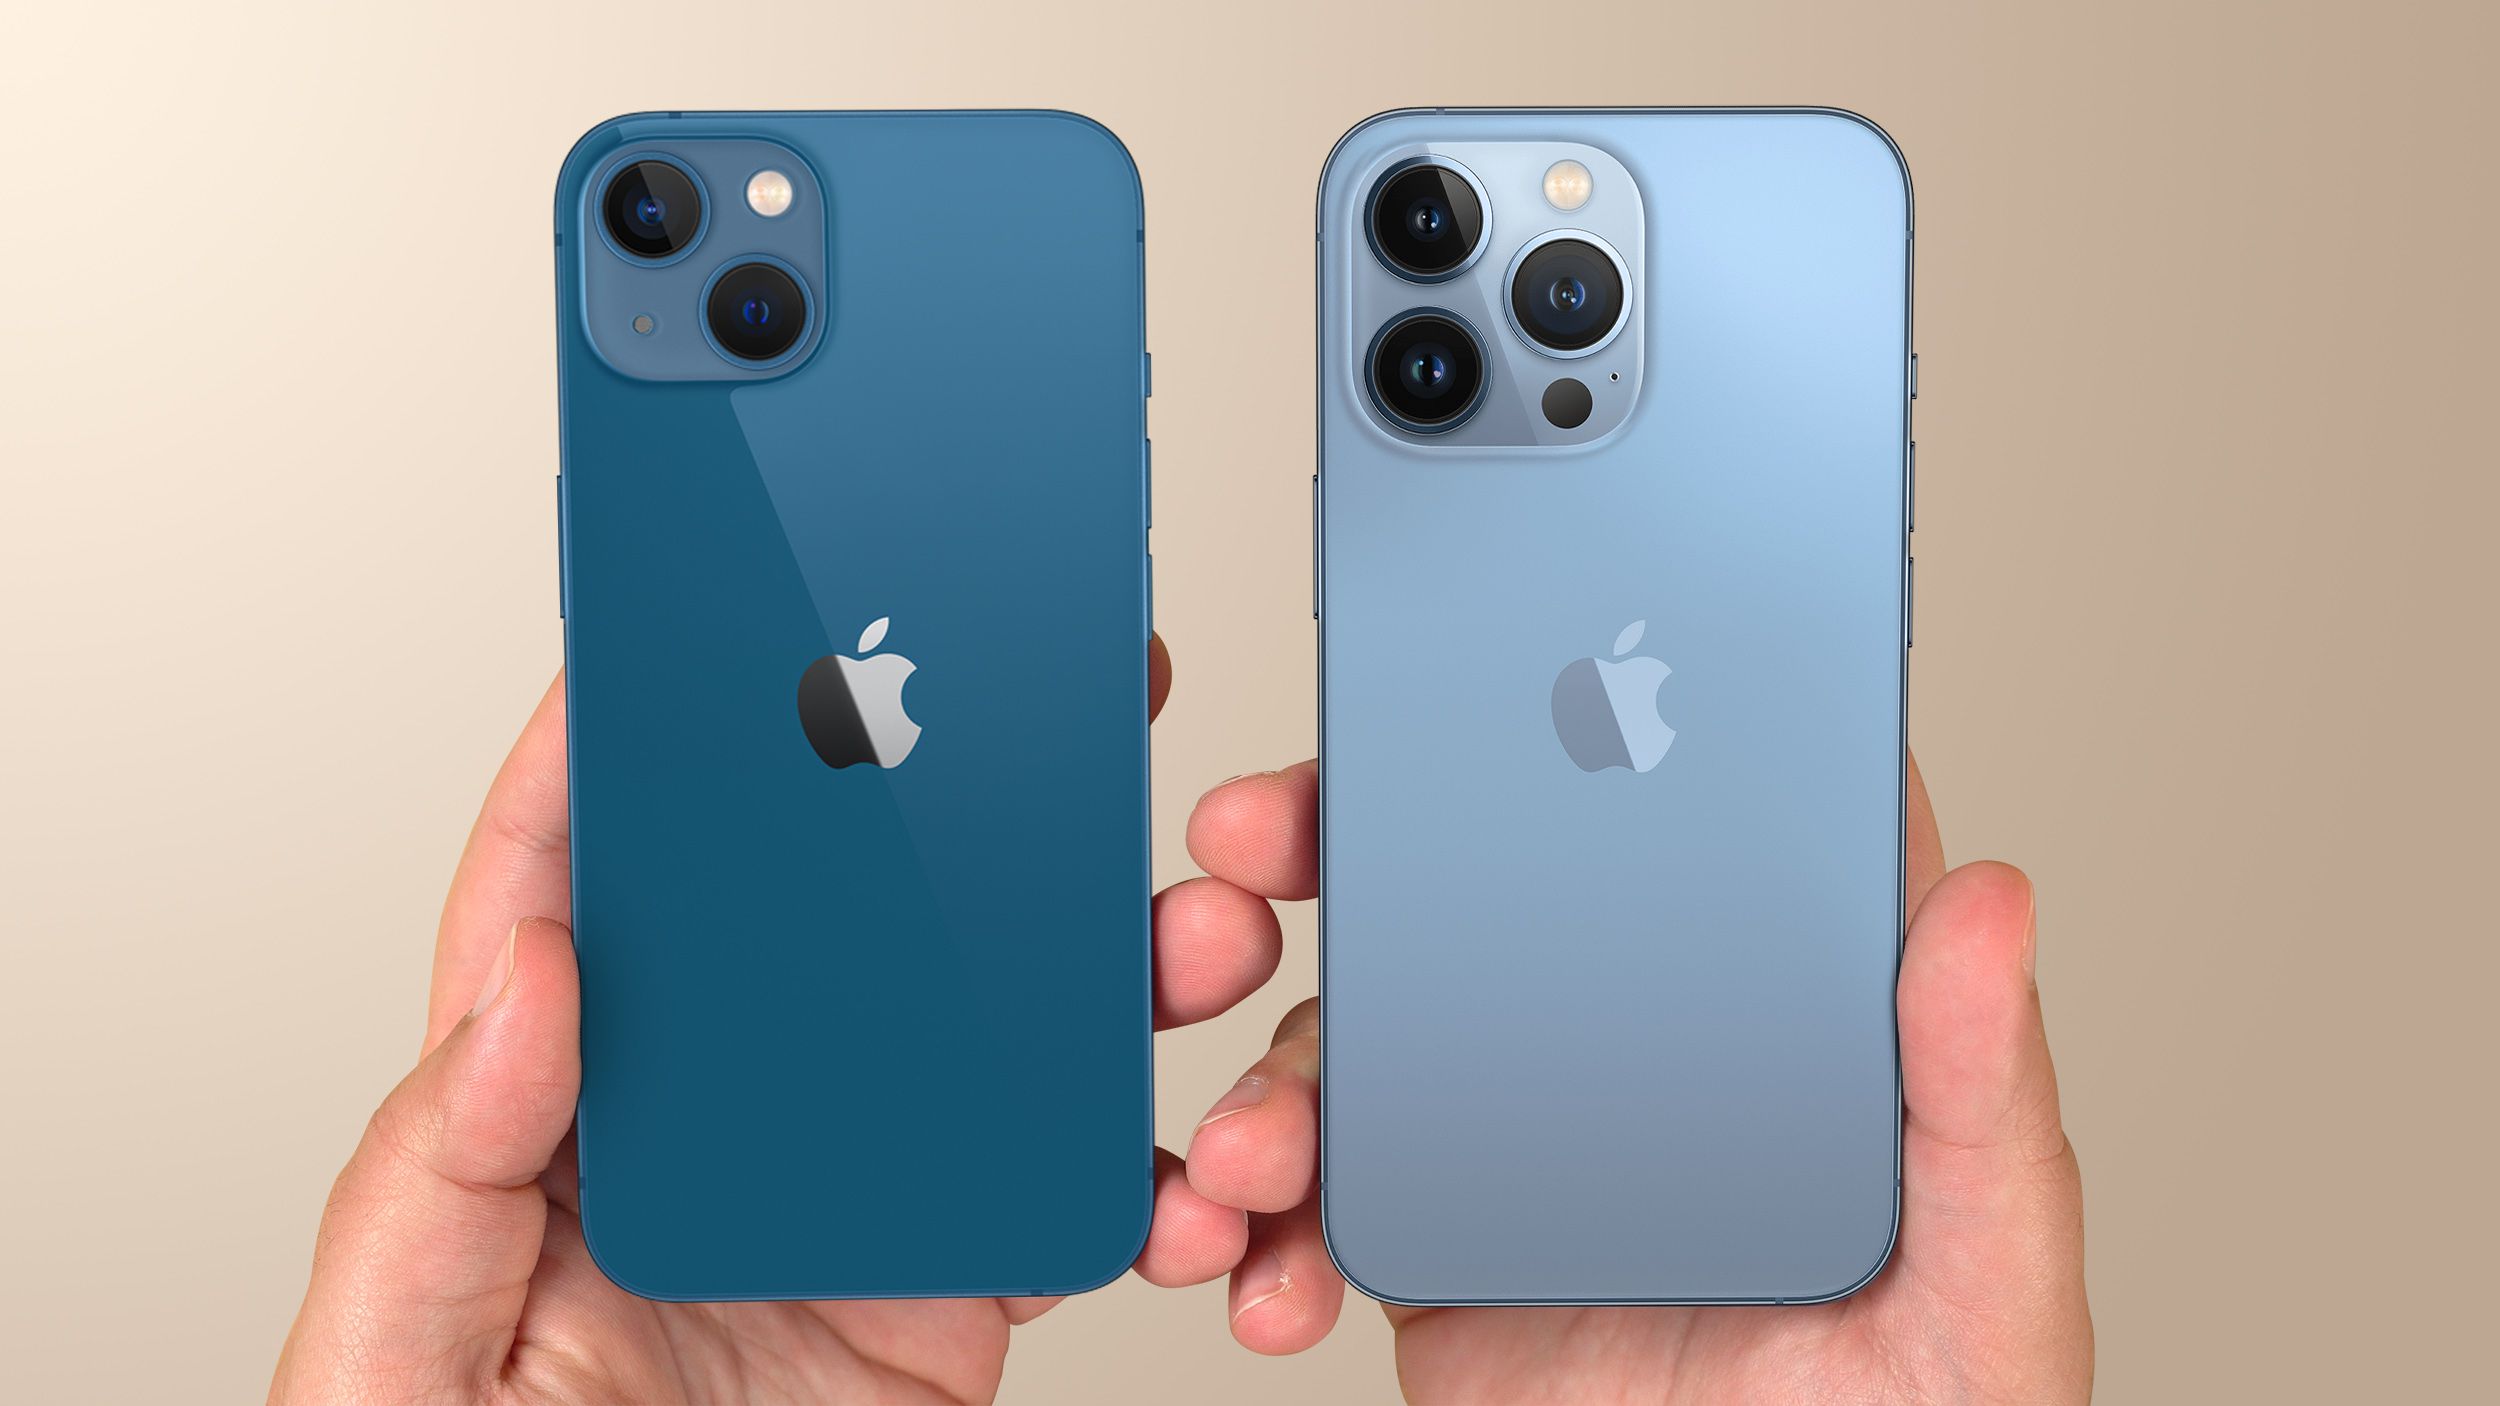 Iphone 13 And Iphone 13 Pro Unboxing Videos Shared Ahead Of Friday S Launch